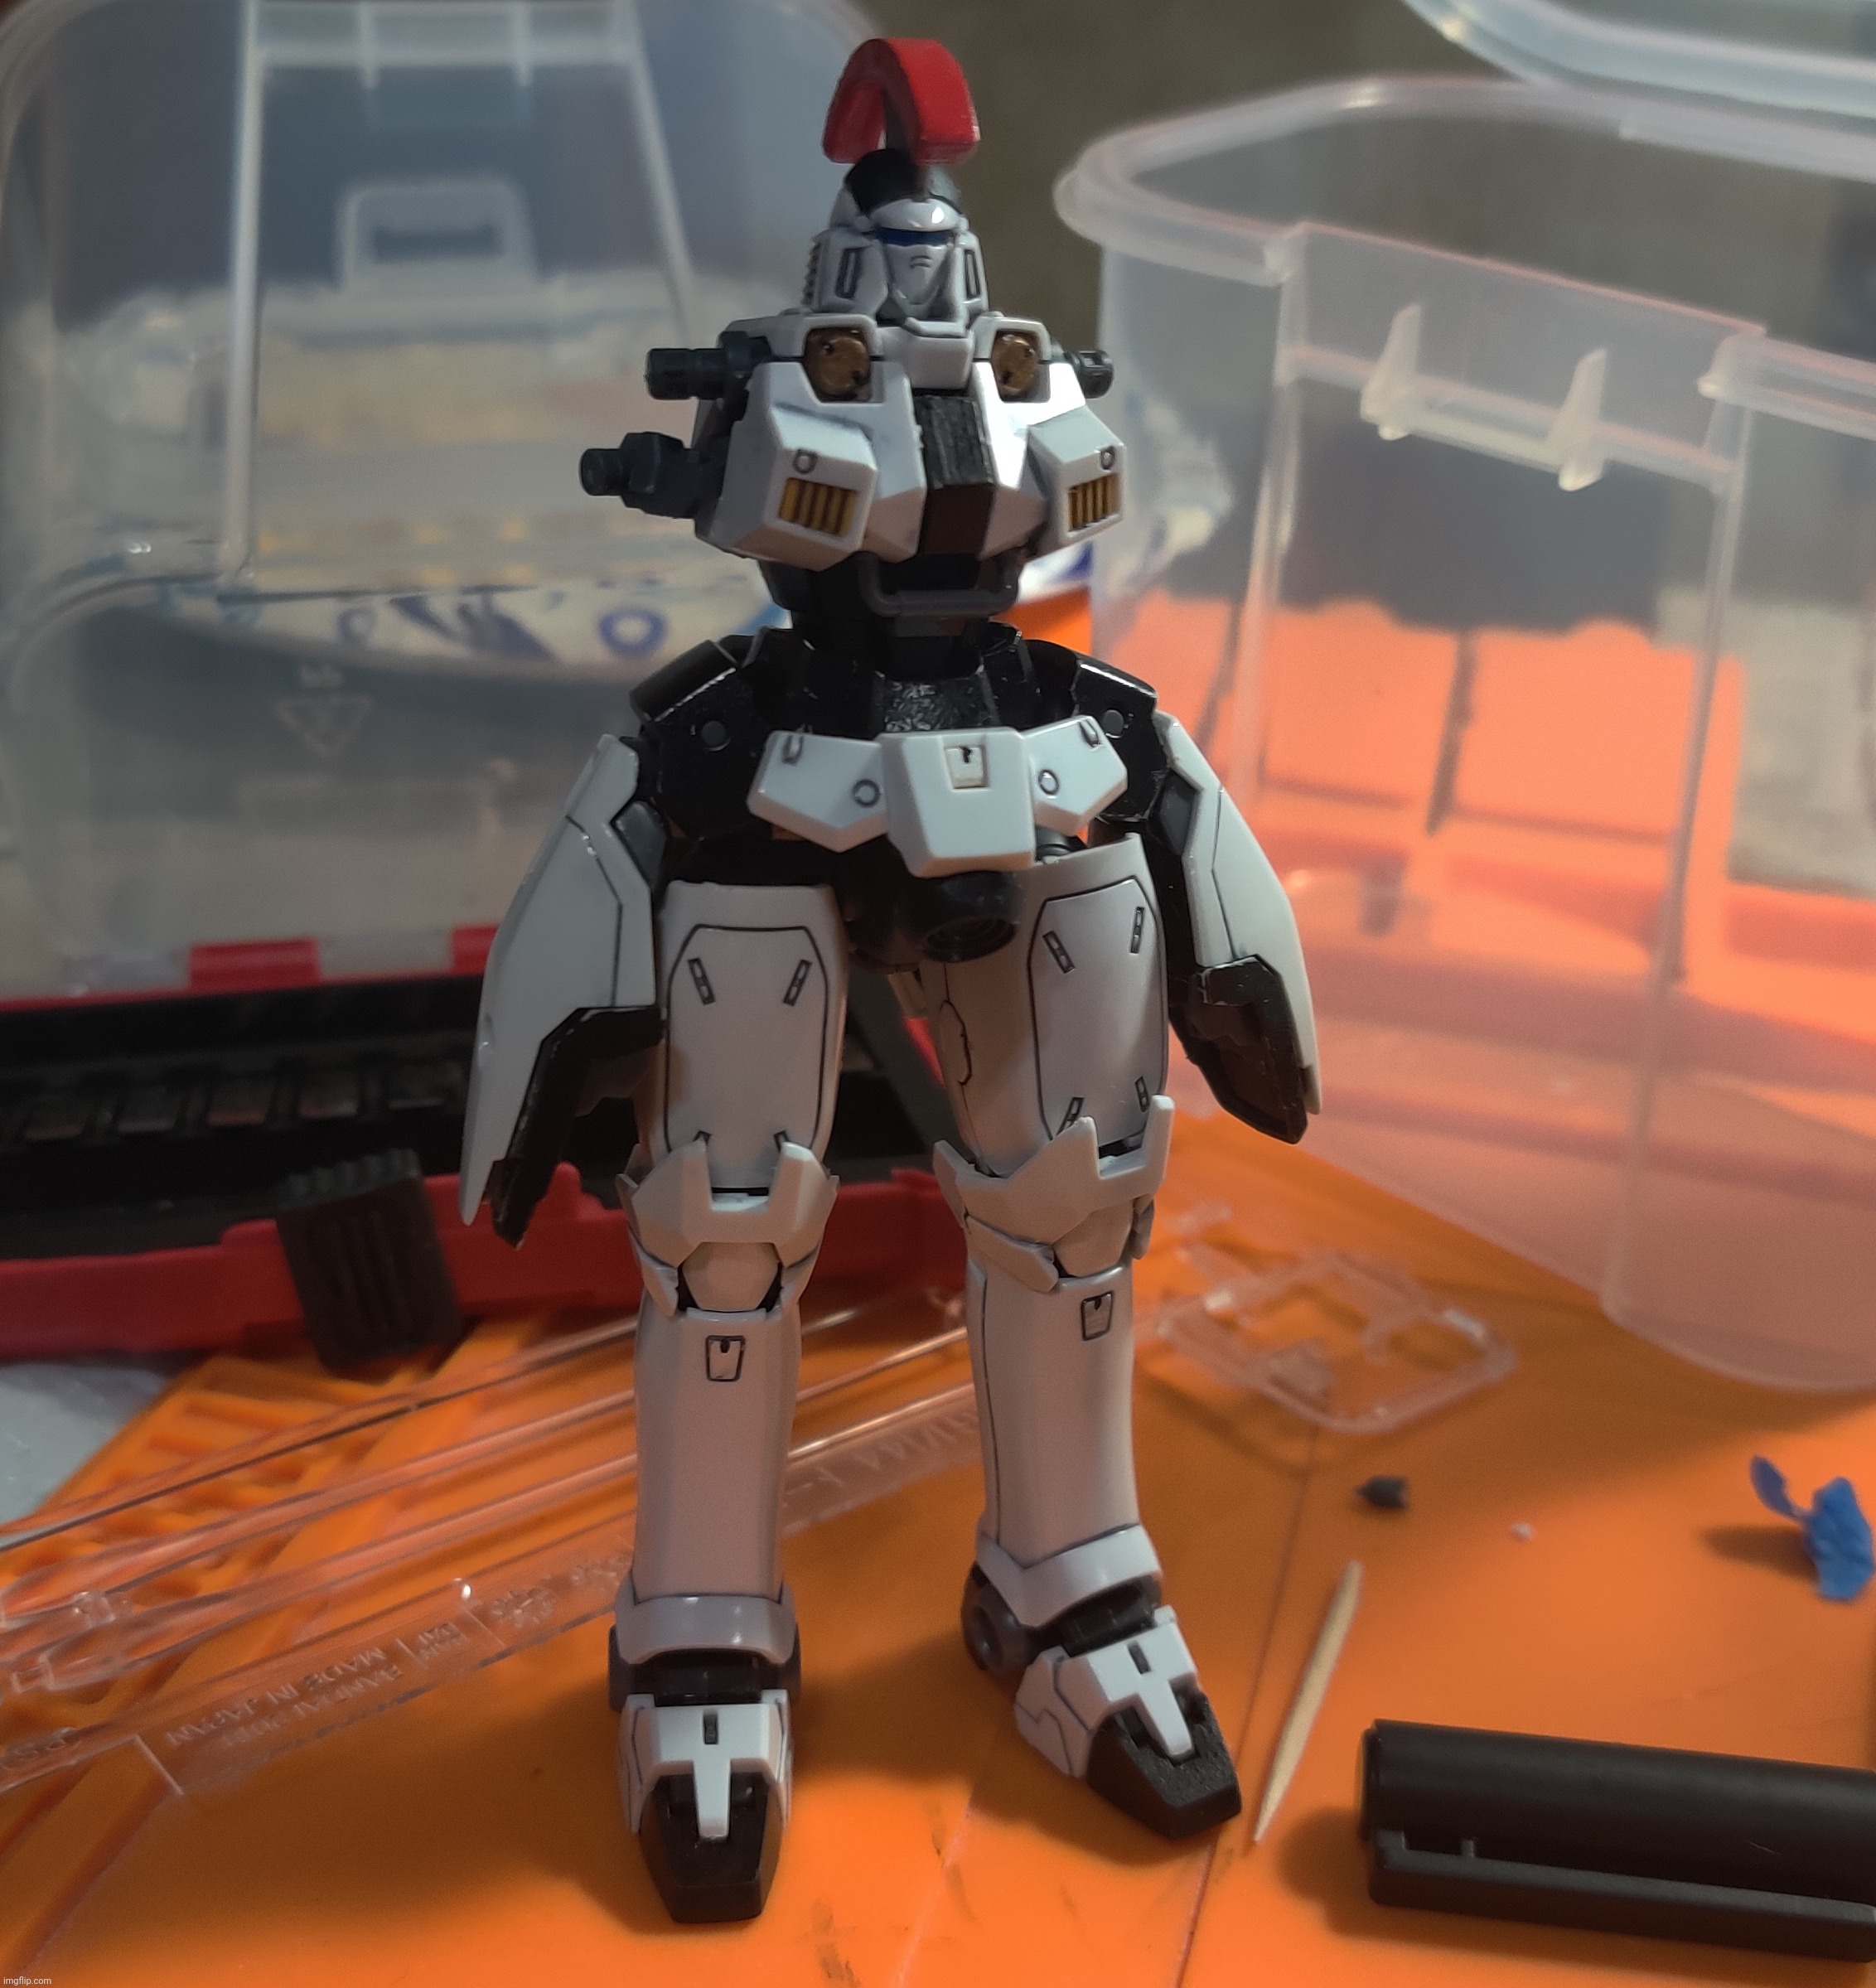 Givin' the tallgeese some upgrades (panel-lining) | made w/ Imgflip meme maker